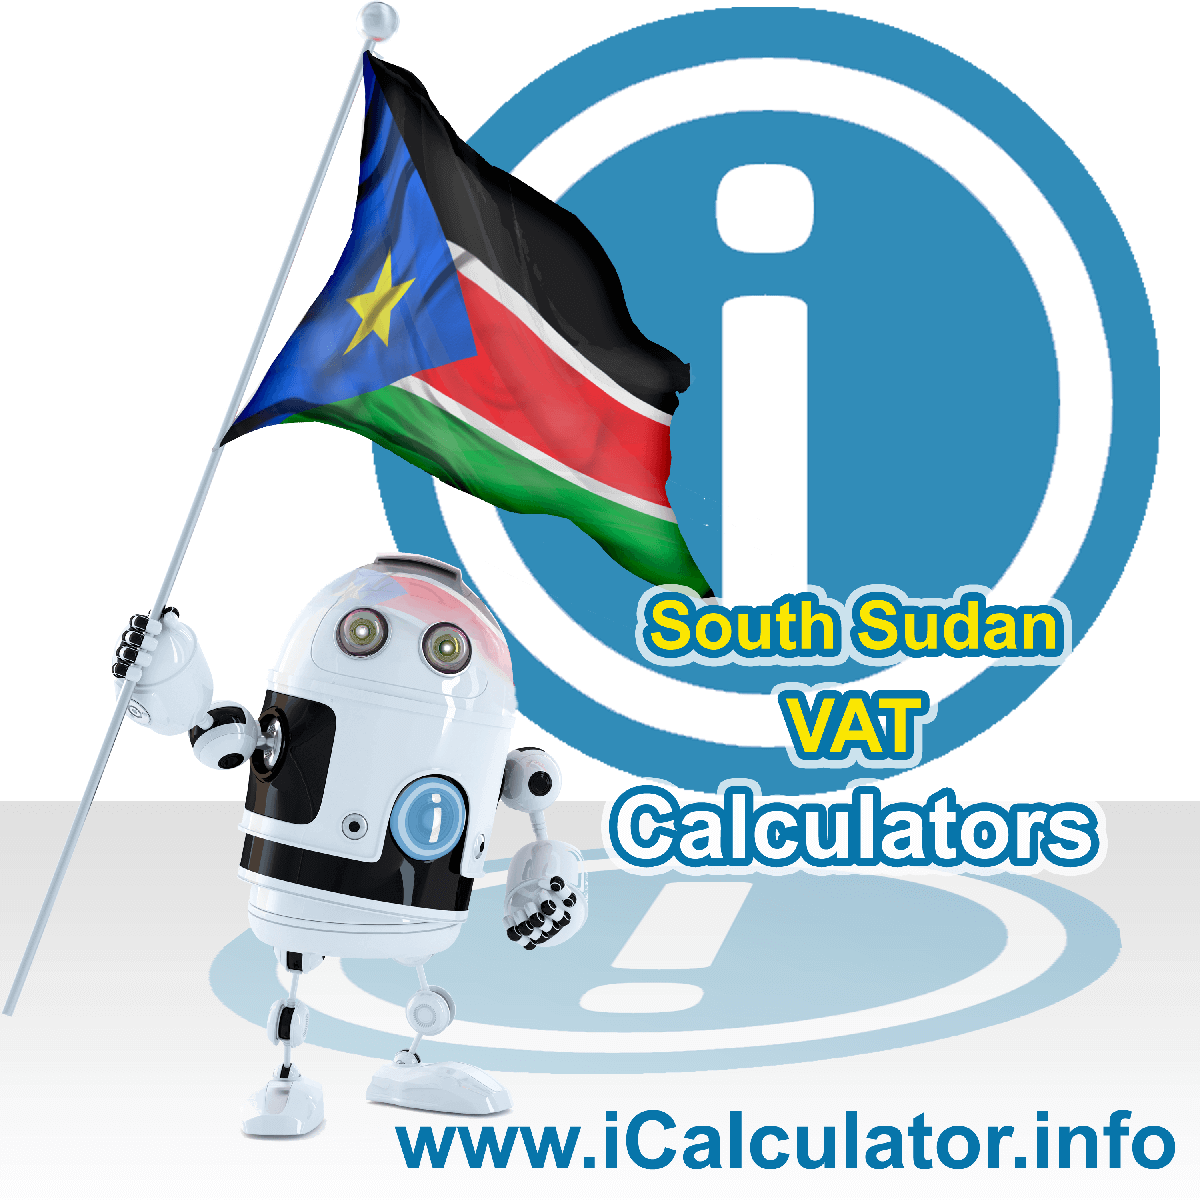 South Sudan VAT Calculator. This image shows the South Sudan flag and information relating to the VAT formula used for calculating Value Added Tax in South Sudan using the South Sudan VAT Calculator in 2023